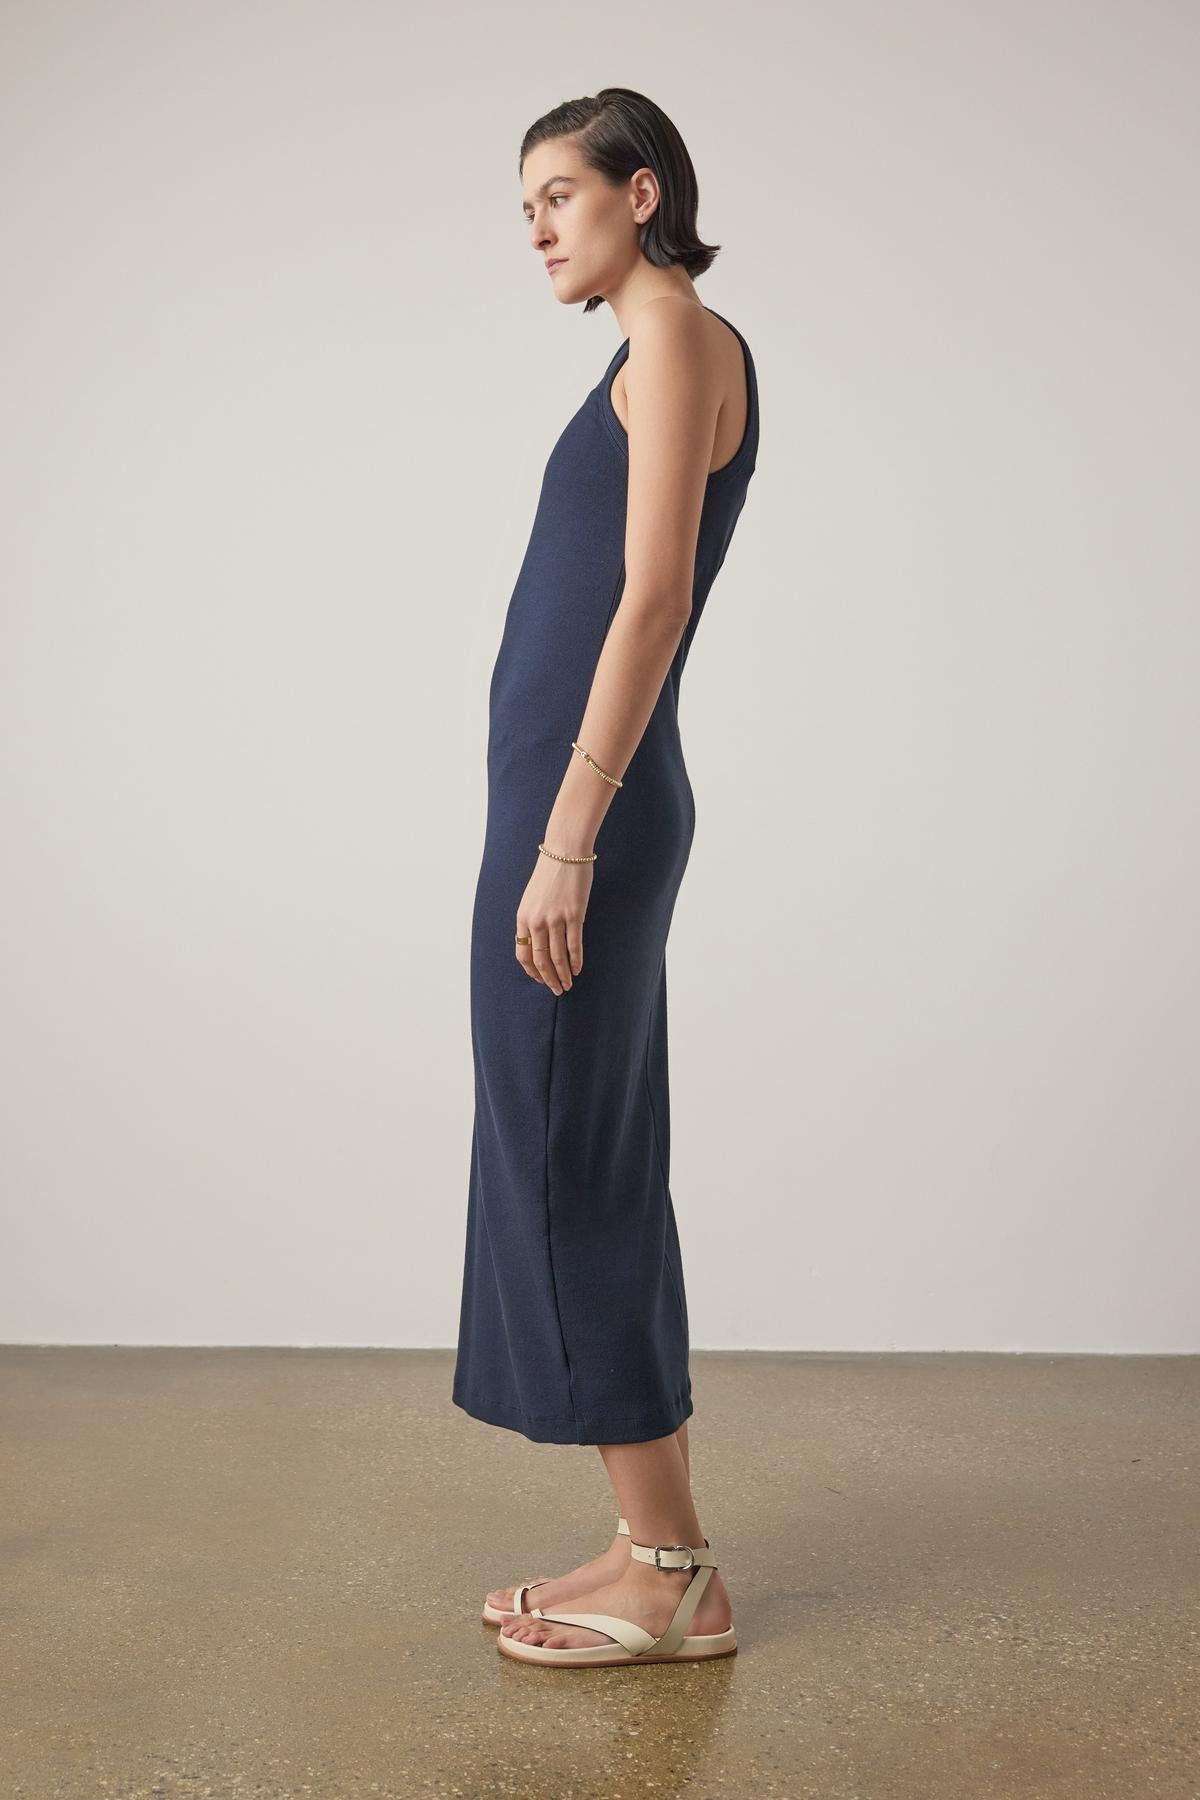 Woman in a navy blue sleeveless Griffith Dress by Velvet by Jenny Graham, with a crew neckline, standing sideways, paired with beige sandals against a neutral background.-36863292670145